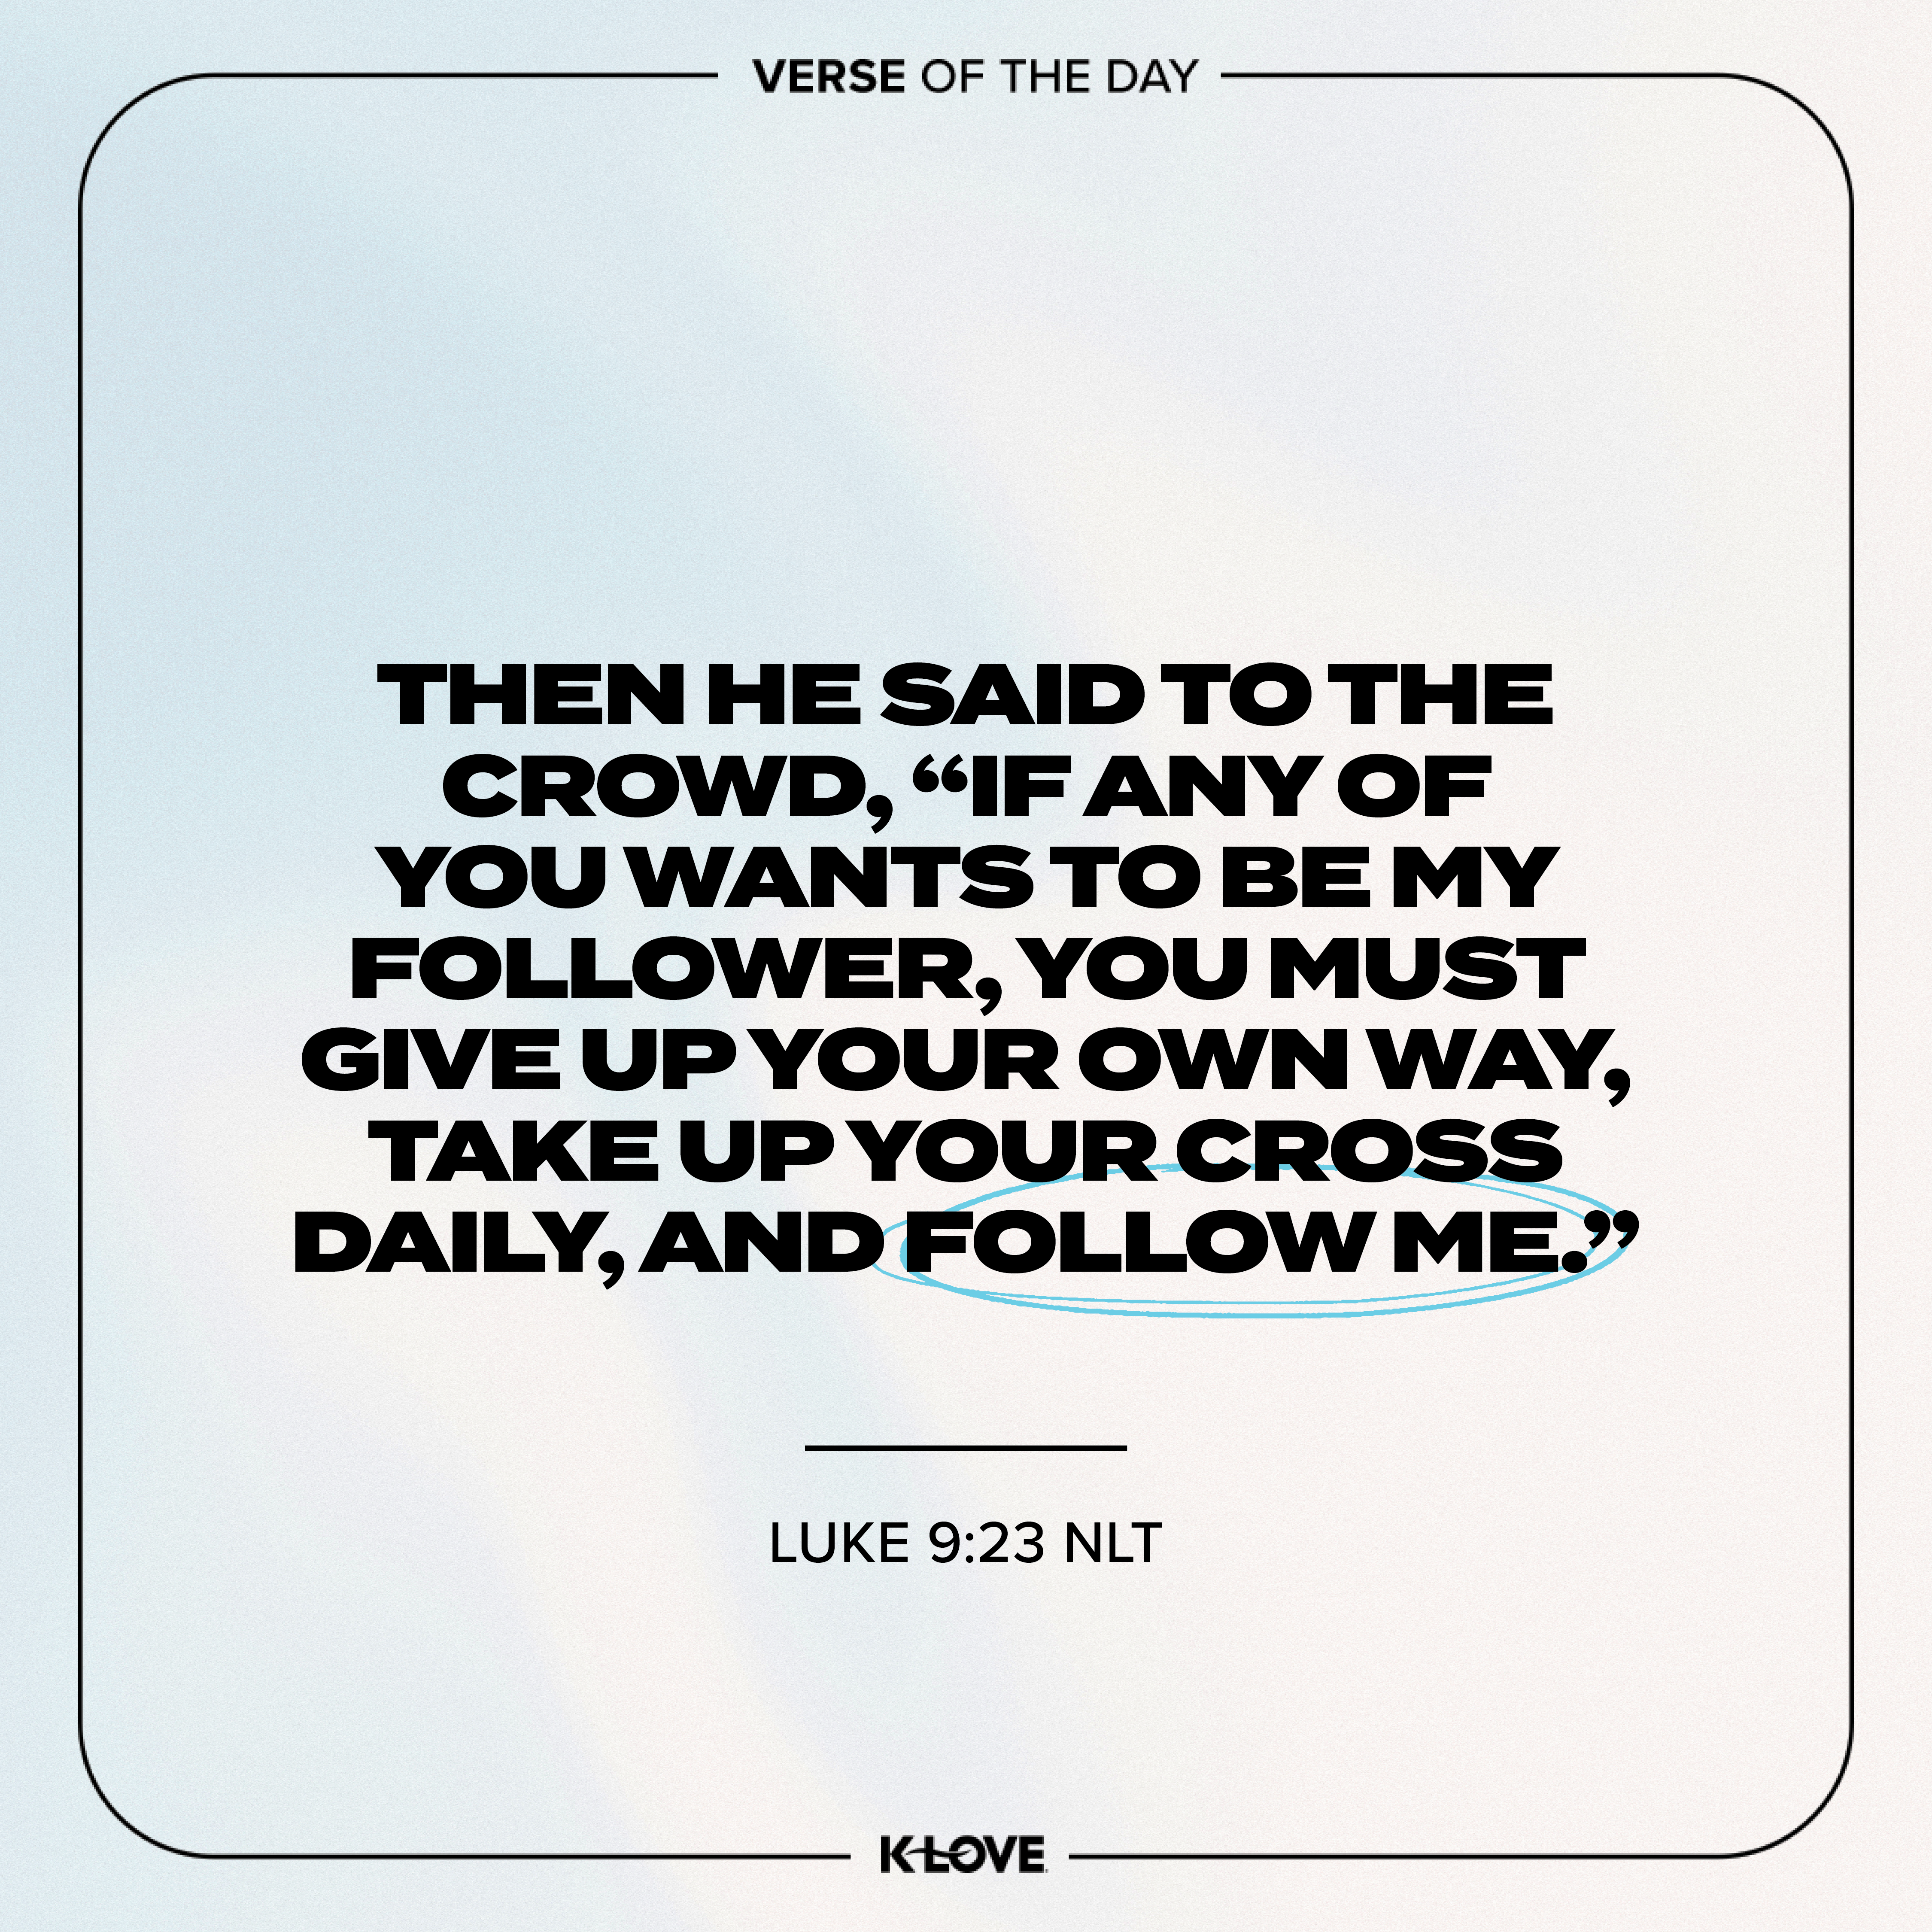 Then He said to the crowd, “If any of you wants to be My follower, you must give up your own way, take up your cross daily, and follow Me.”